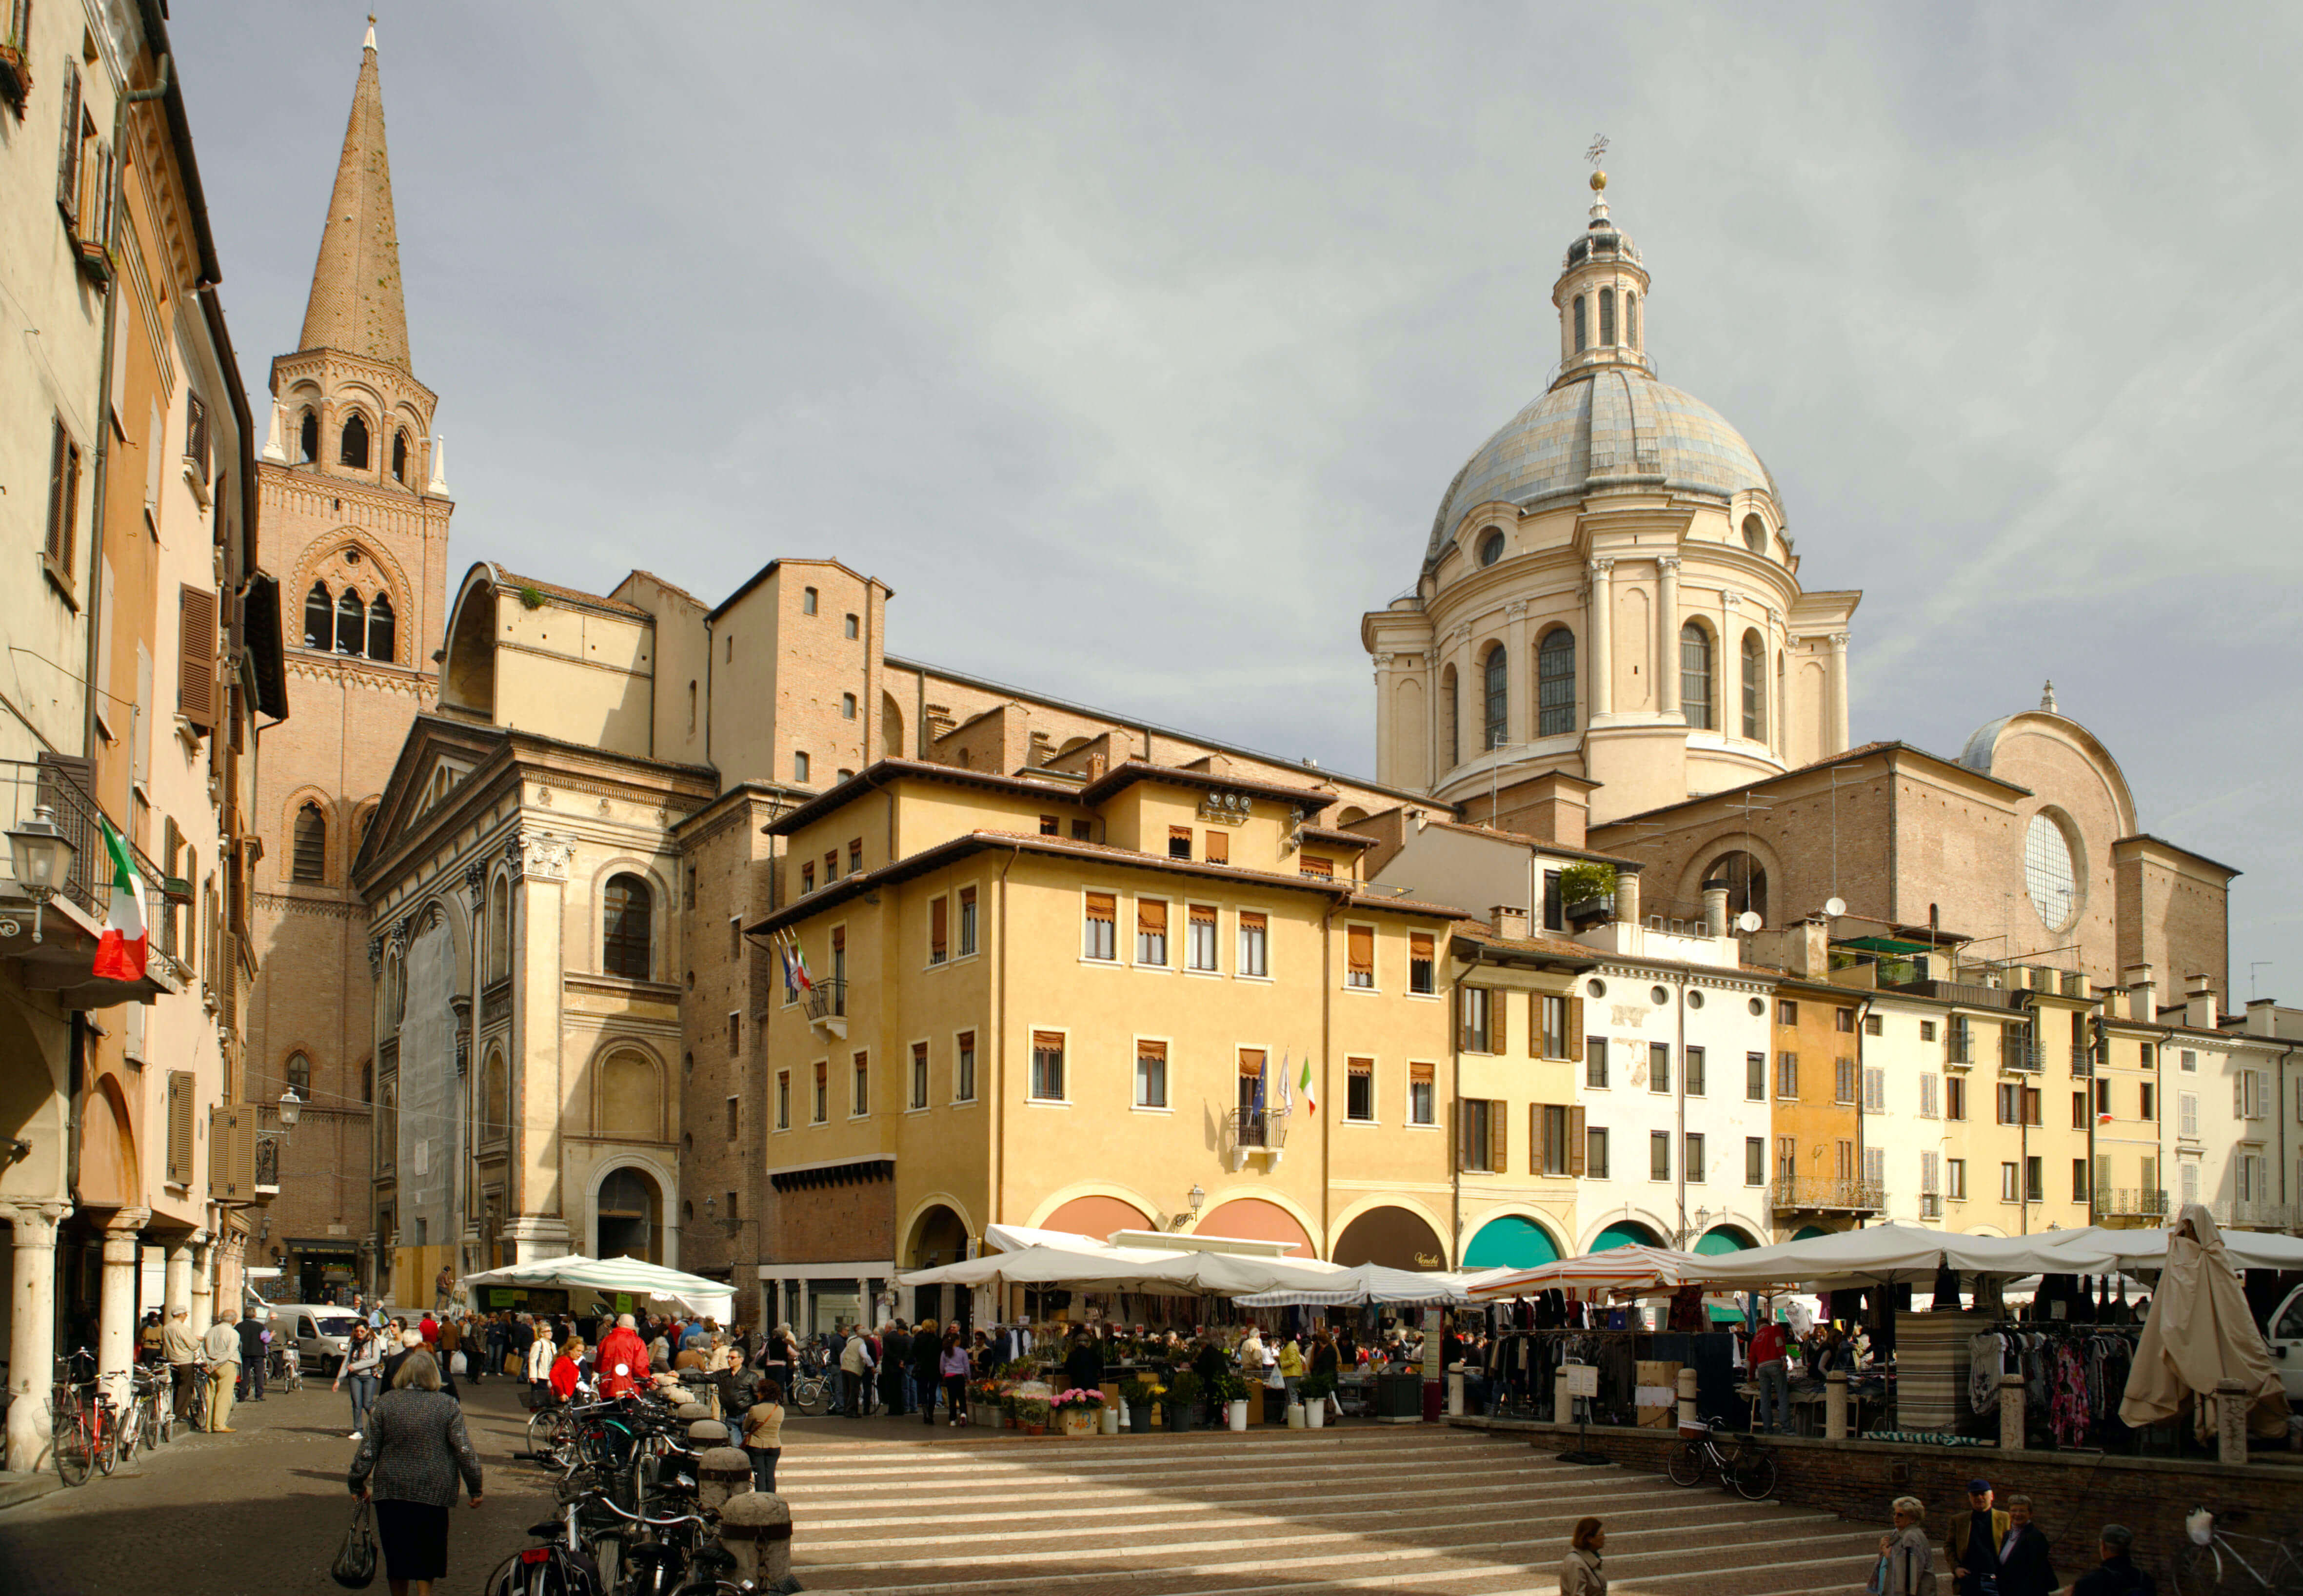 A modern townsquare. It is busy with activity and there are people shopping, chatting, and walking around at the market stalls. There is a church spire and the dome of a second church. Some buildings have Italian flags hanign from balconies.